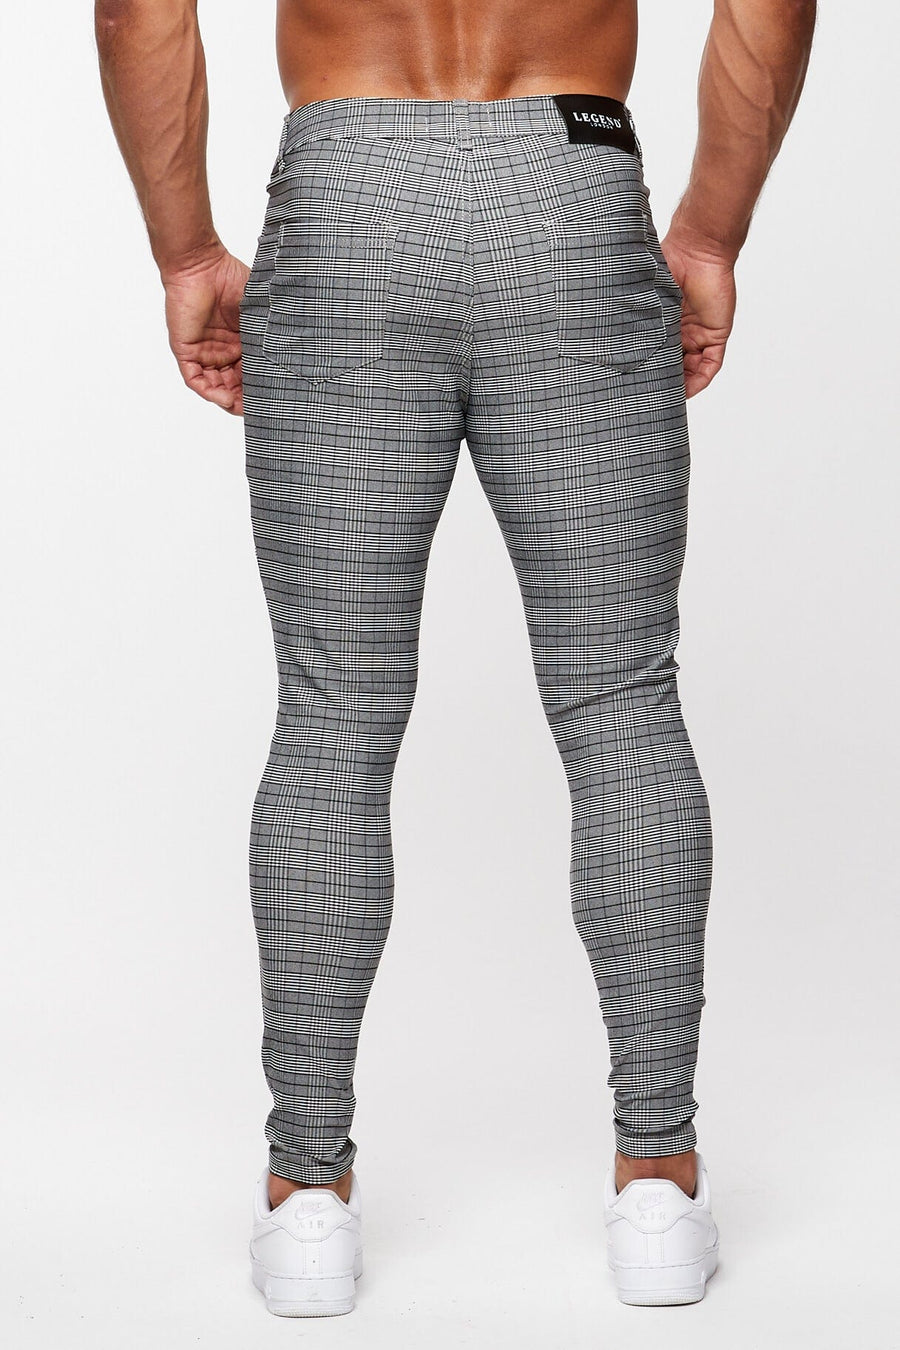 Legend London Trousers MICRO CHECK TROUSERS - GREY